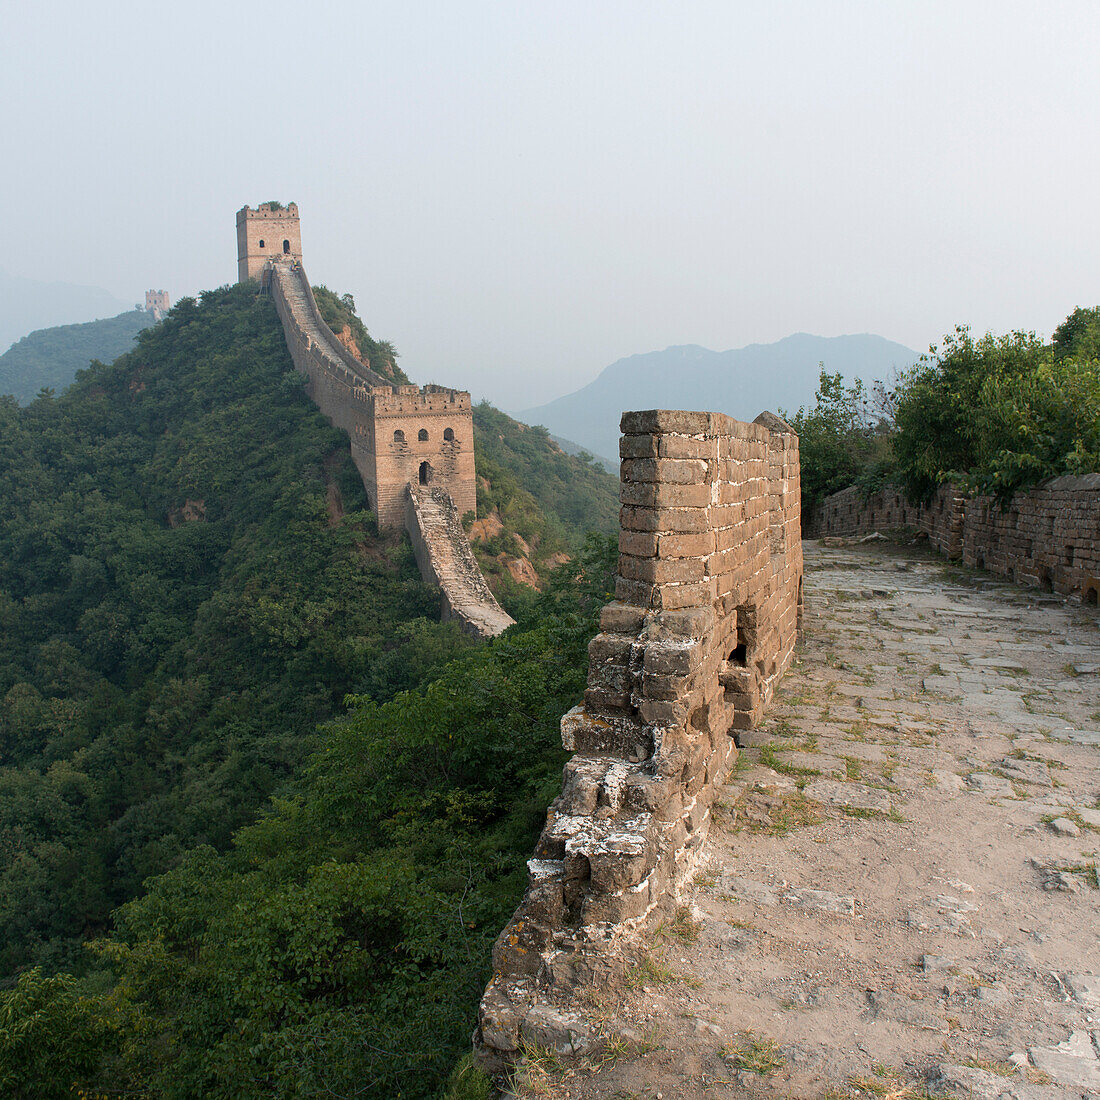 'The Great Wall of China;Beijing China'